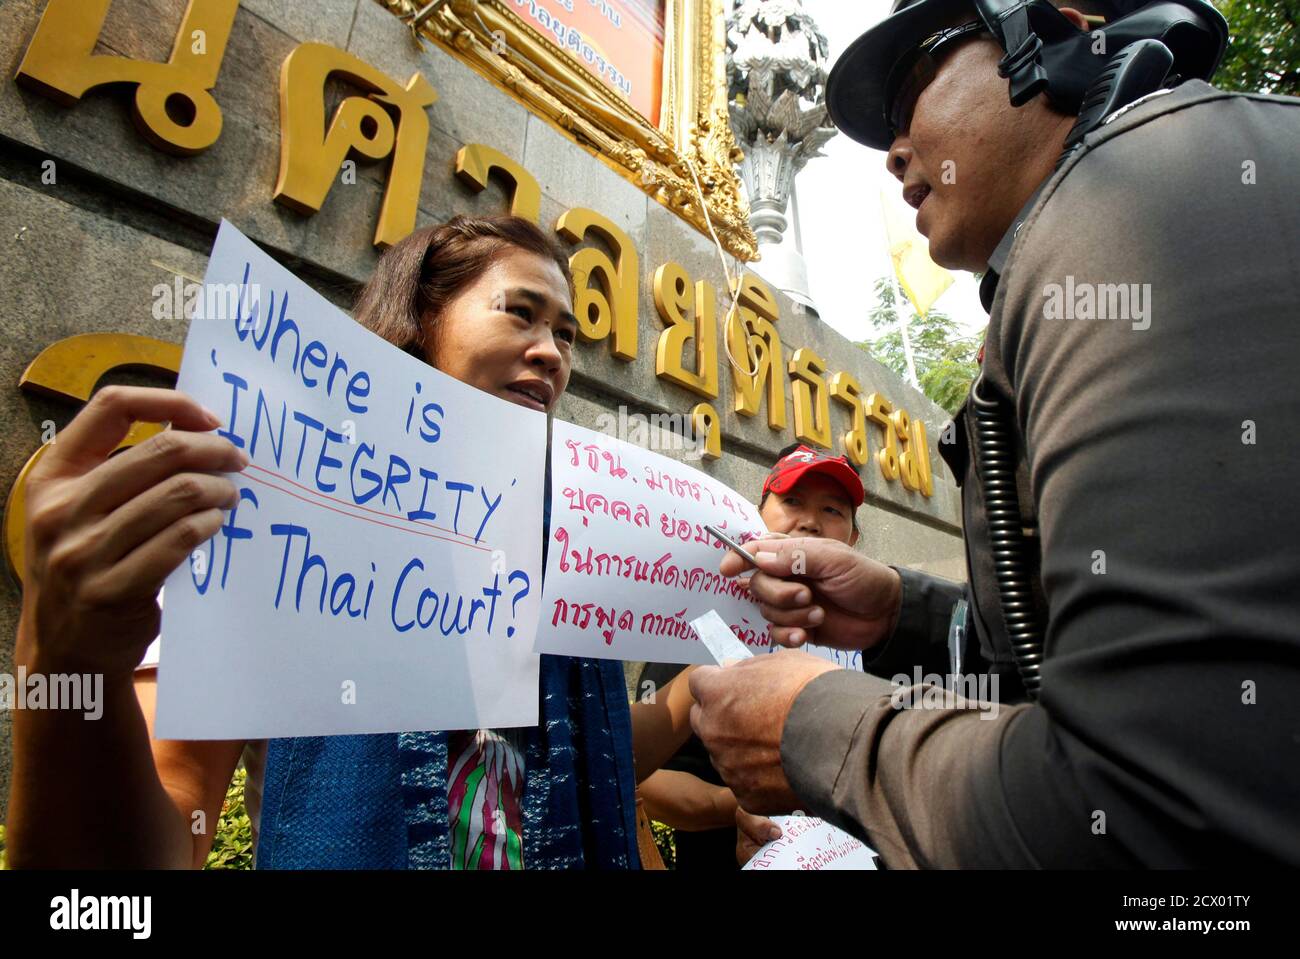 A police officer speaks with an activist during a protest in front of the Thai Criminal court in Bangkok January 25, 2013. The activists were protesting against the lese majeste law which jailed a former Thai magazine editor for 10 years on Wednesday for insulting the royal family, a sentence that drew condemnation from international rights groups and the European Union. Somyot Prueksakasemsuk was found guilty of publishing articles defaming King Bhumibol Adulyadej in 2010 when he was editor of a magazine devoted to self-exiled former Prime Minister Thaksin Shinawatra.  REUTERS/Chaiwat Subpras Stock Photo